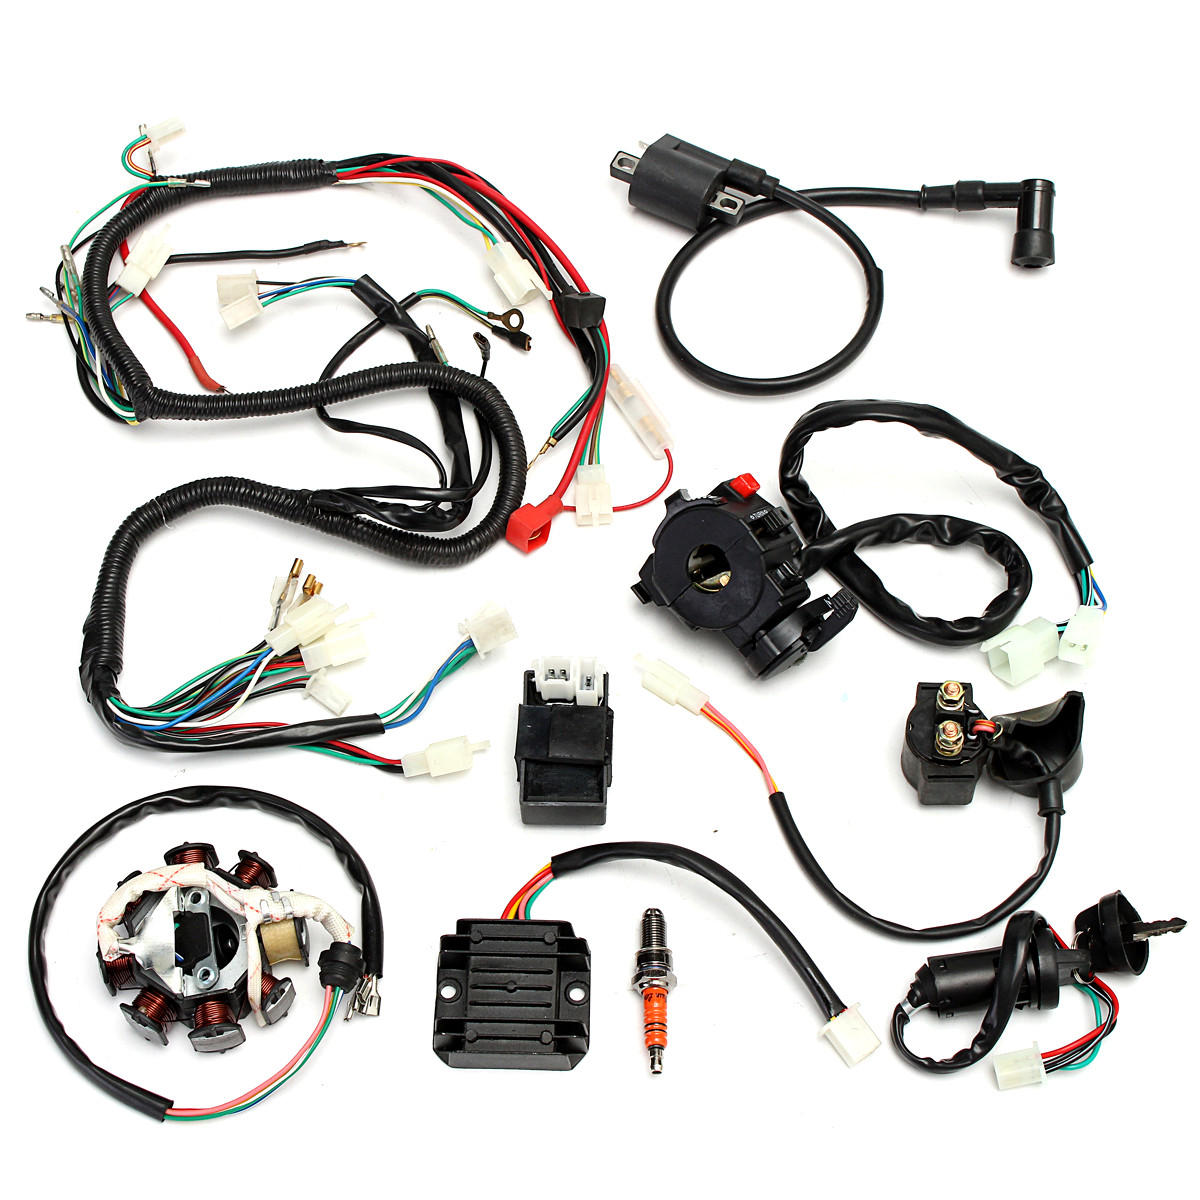 Complete electrics wiring harness for chinese dirt bike atv quad 150-250 300cc